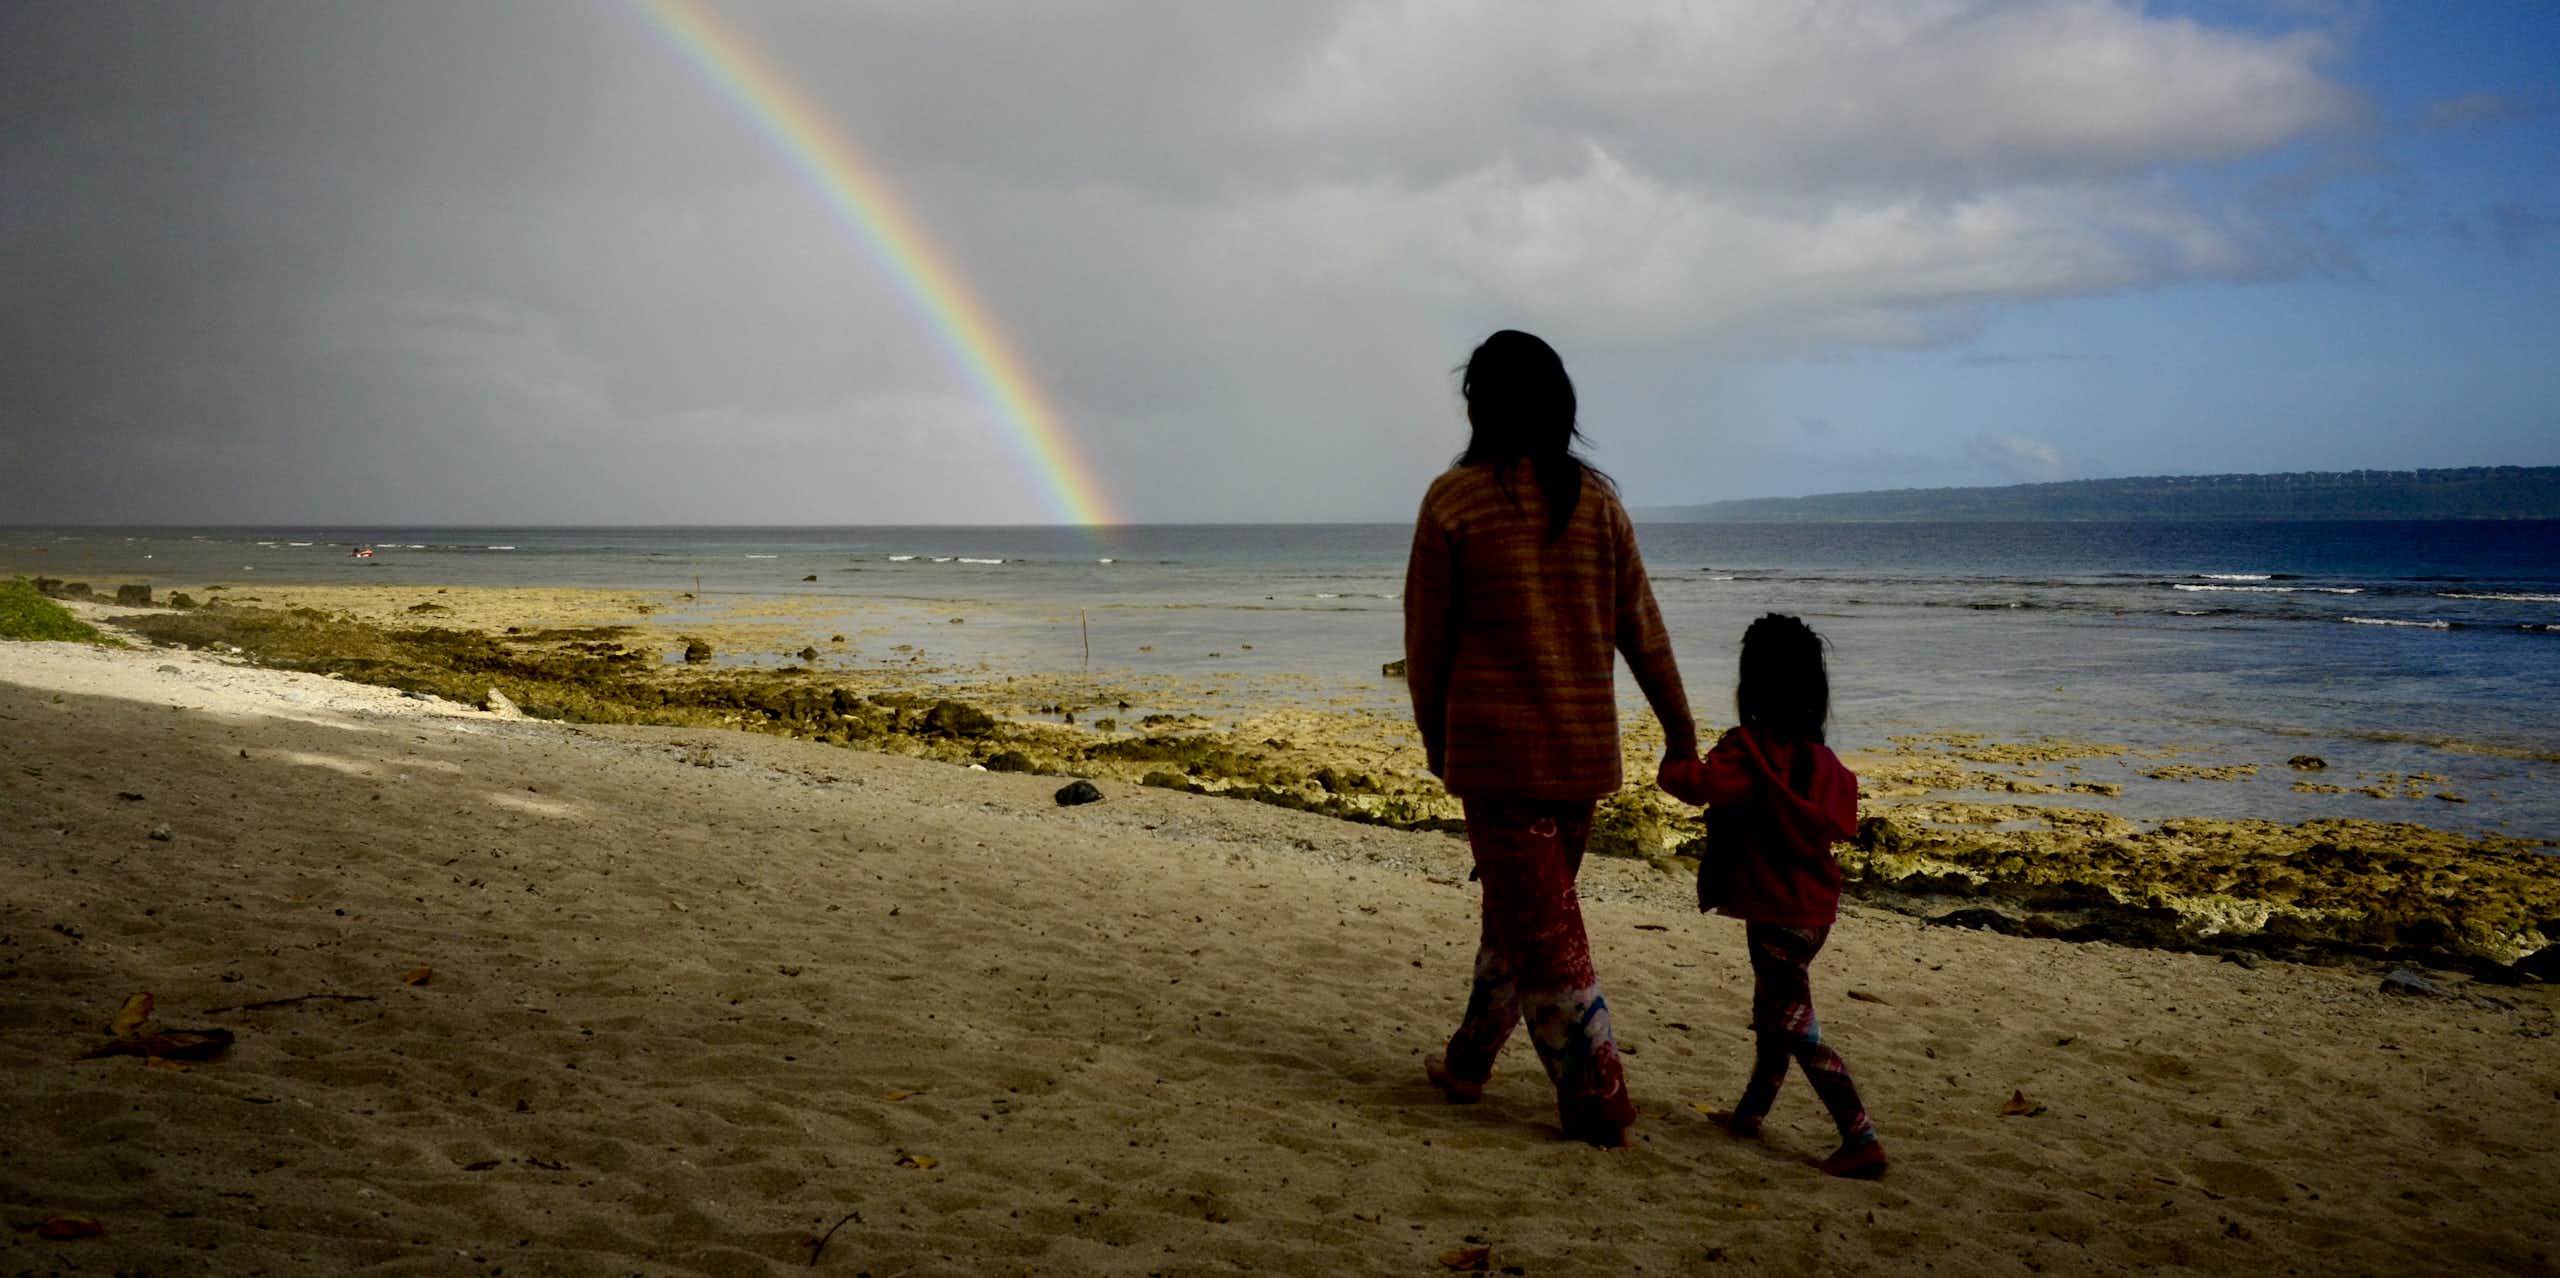 woman and child walk on beach with rainbow